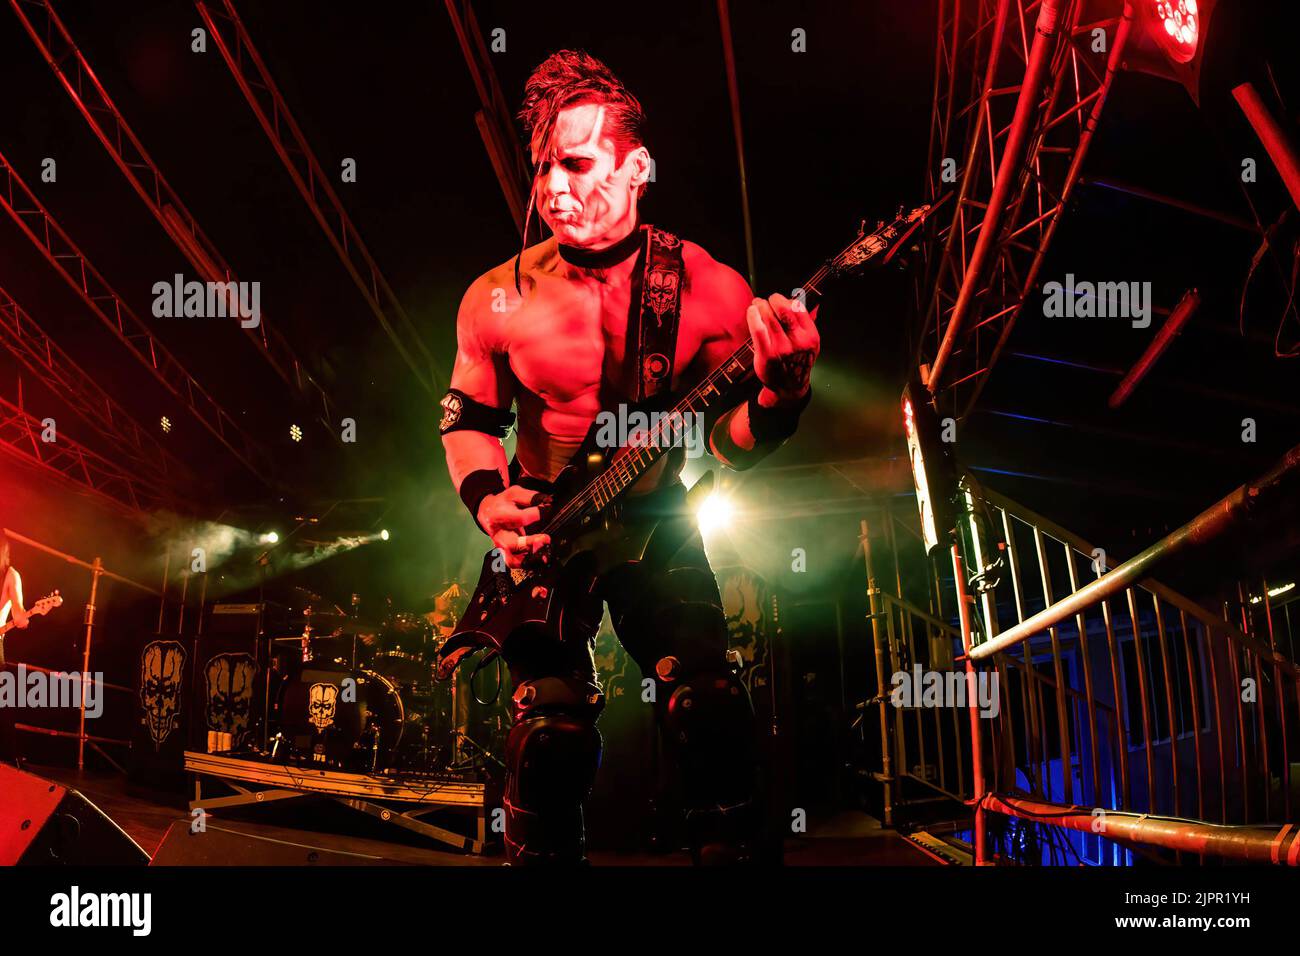 Milano, Italy. 19th Aug, 2022. Doyle Wolfgang von Frankenstein from Misfits performs live during a concert at Circolo Magnolia. Doyle Wolfgang von Frankenstein, is an American guitarist best known for his material with the horror punk band the Misfits and his own band eponymously named Doyle. (Photo by Mairo Cinquetti/SOPA Images/Sipa USA) Credit: Sipa USA/Alamy Live News Stock Photo